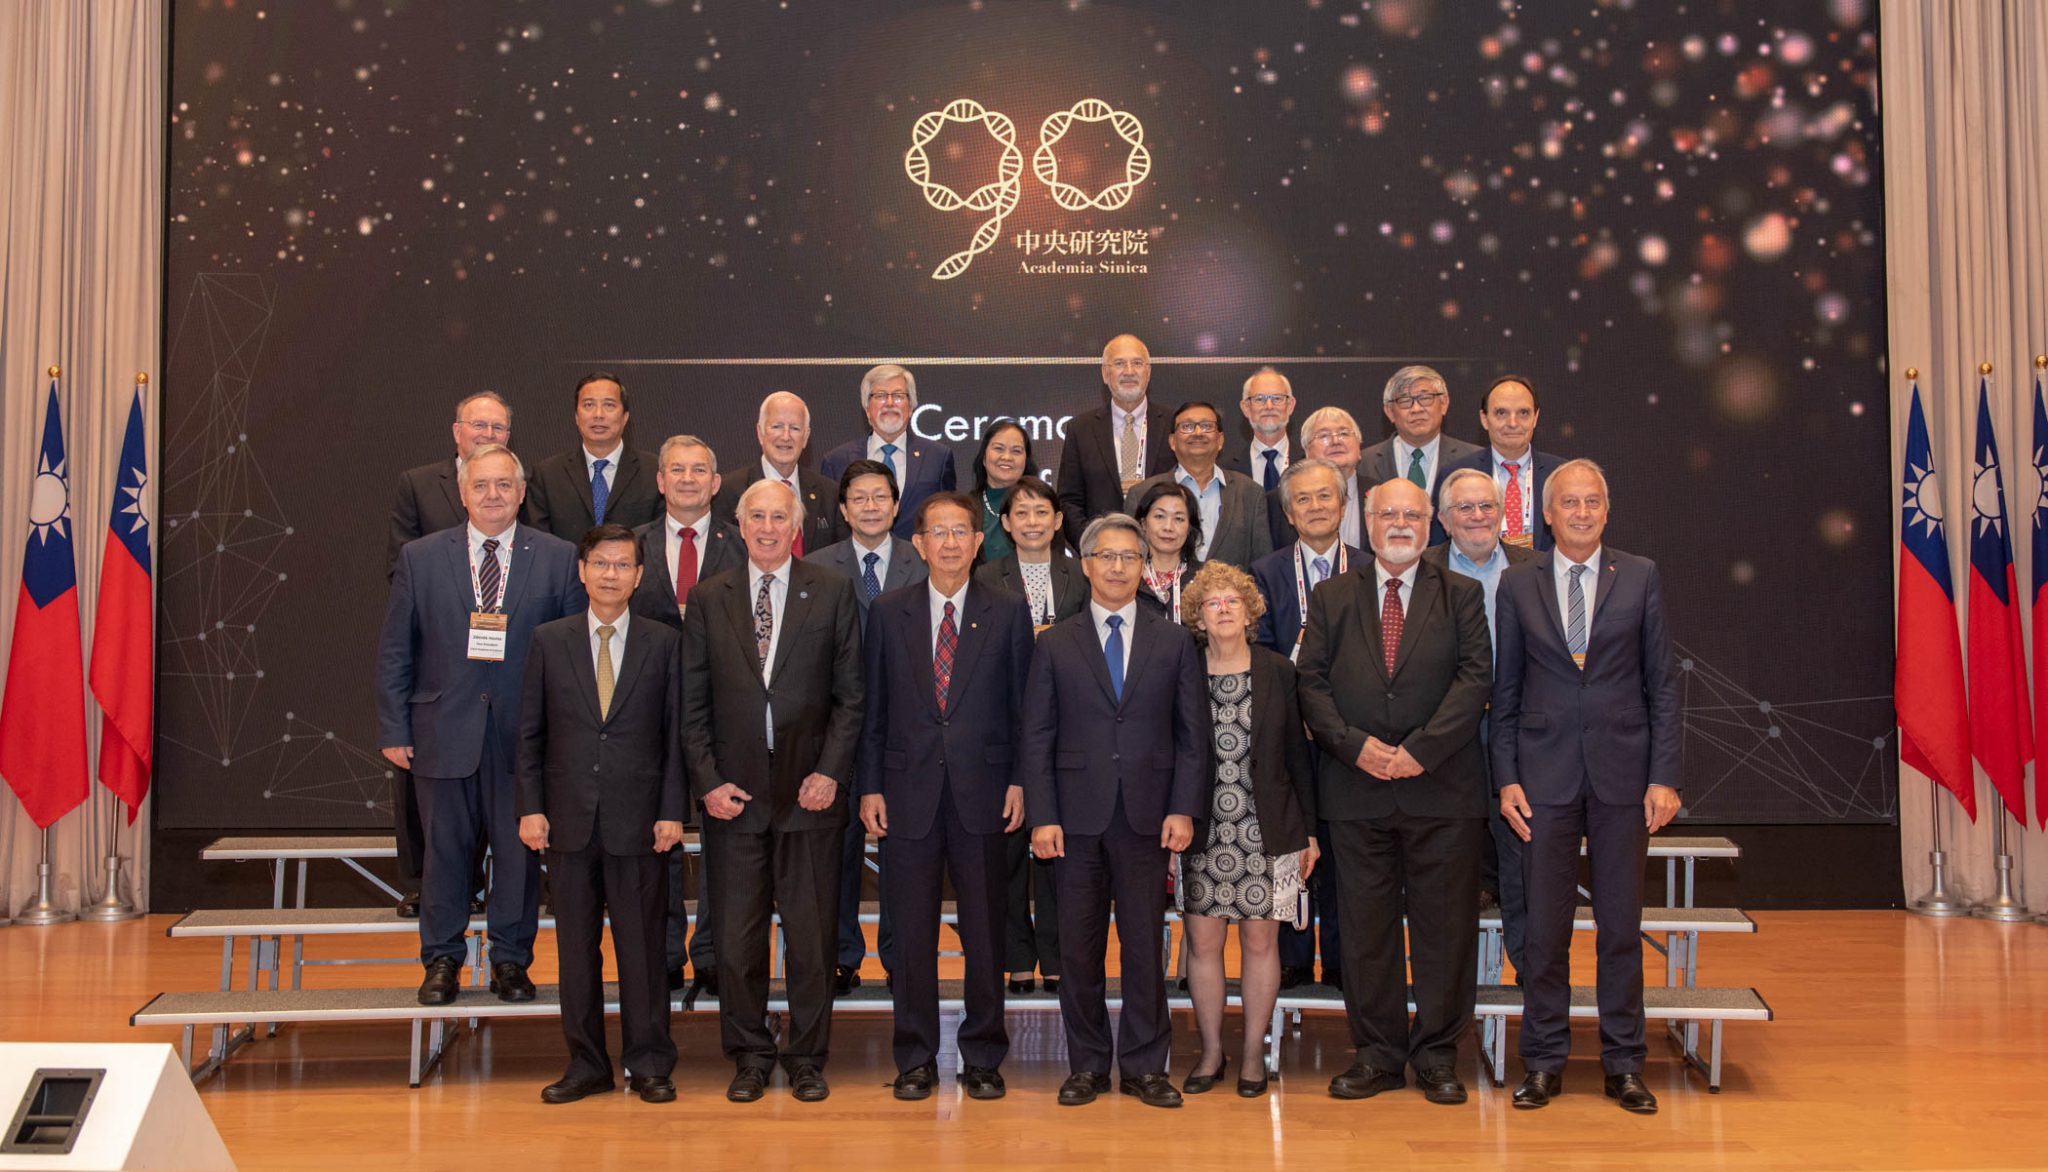 International Scientific Leaders’ Forum in Celebration of the 90th Anniversary of Academia Sinica